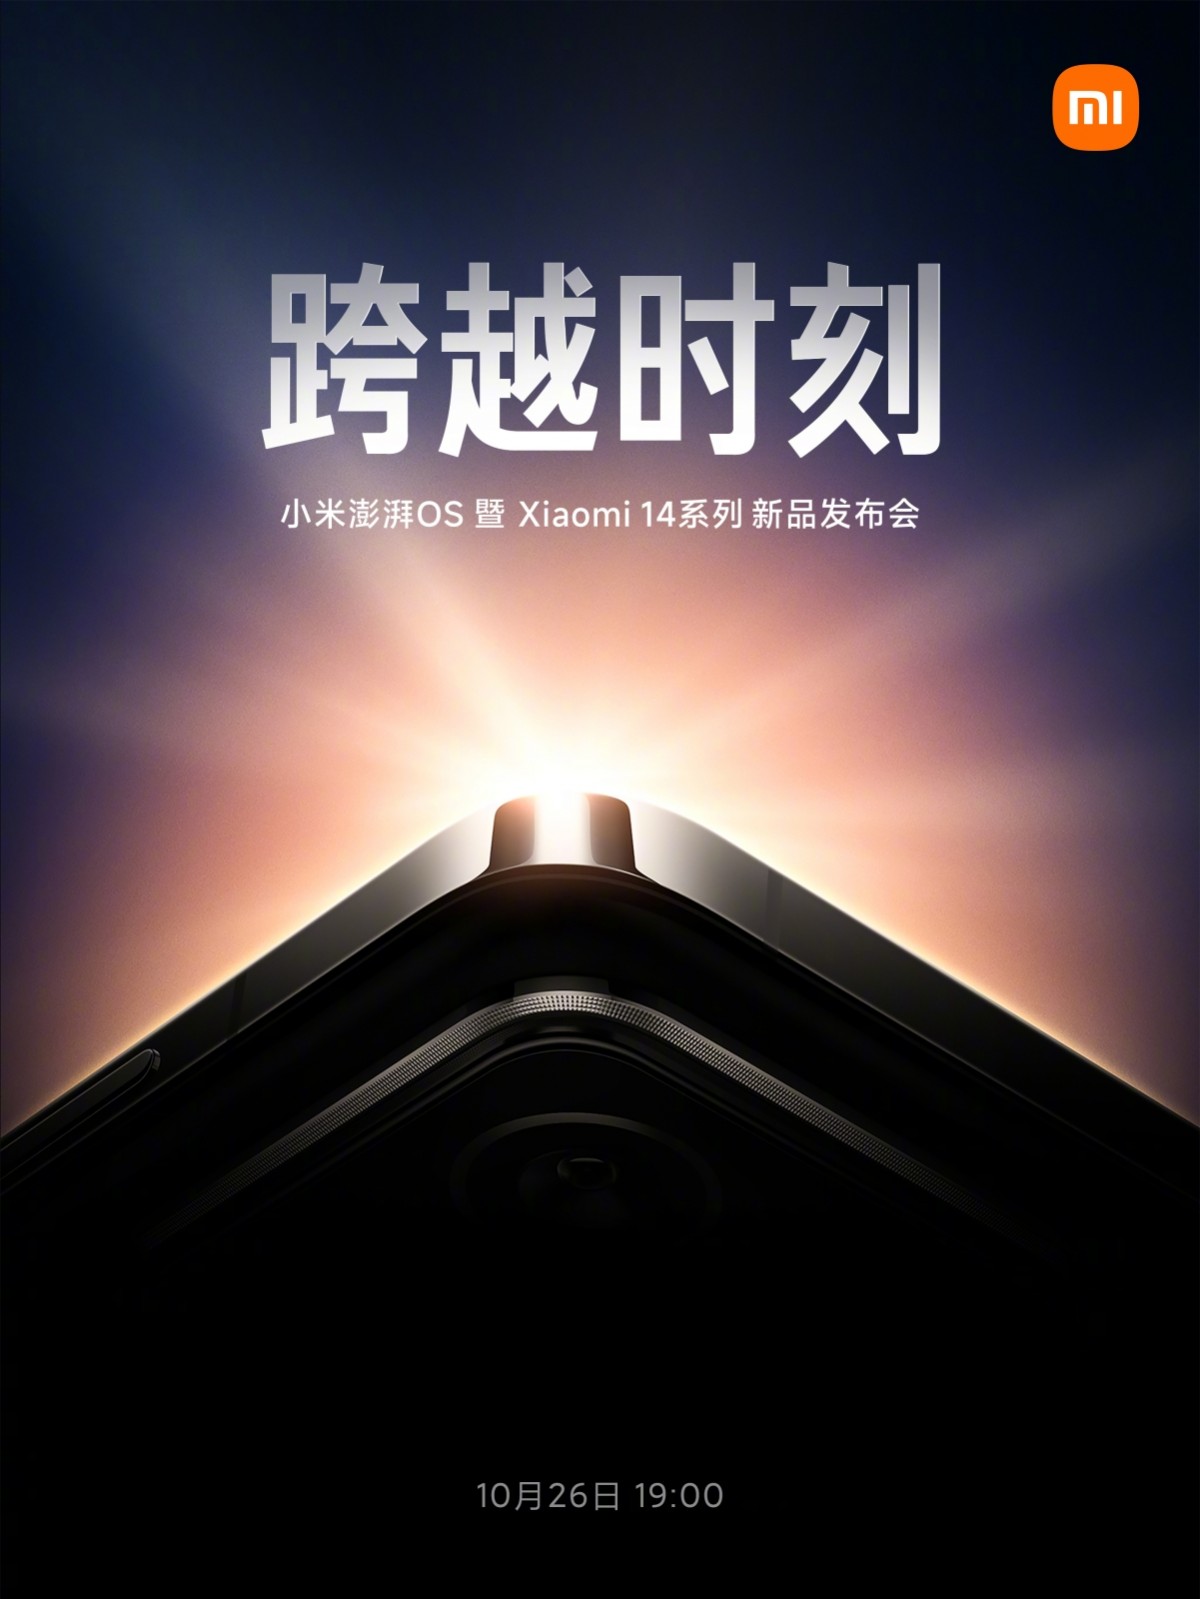 Xiaomi 14 is officially arriving on October 26